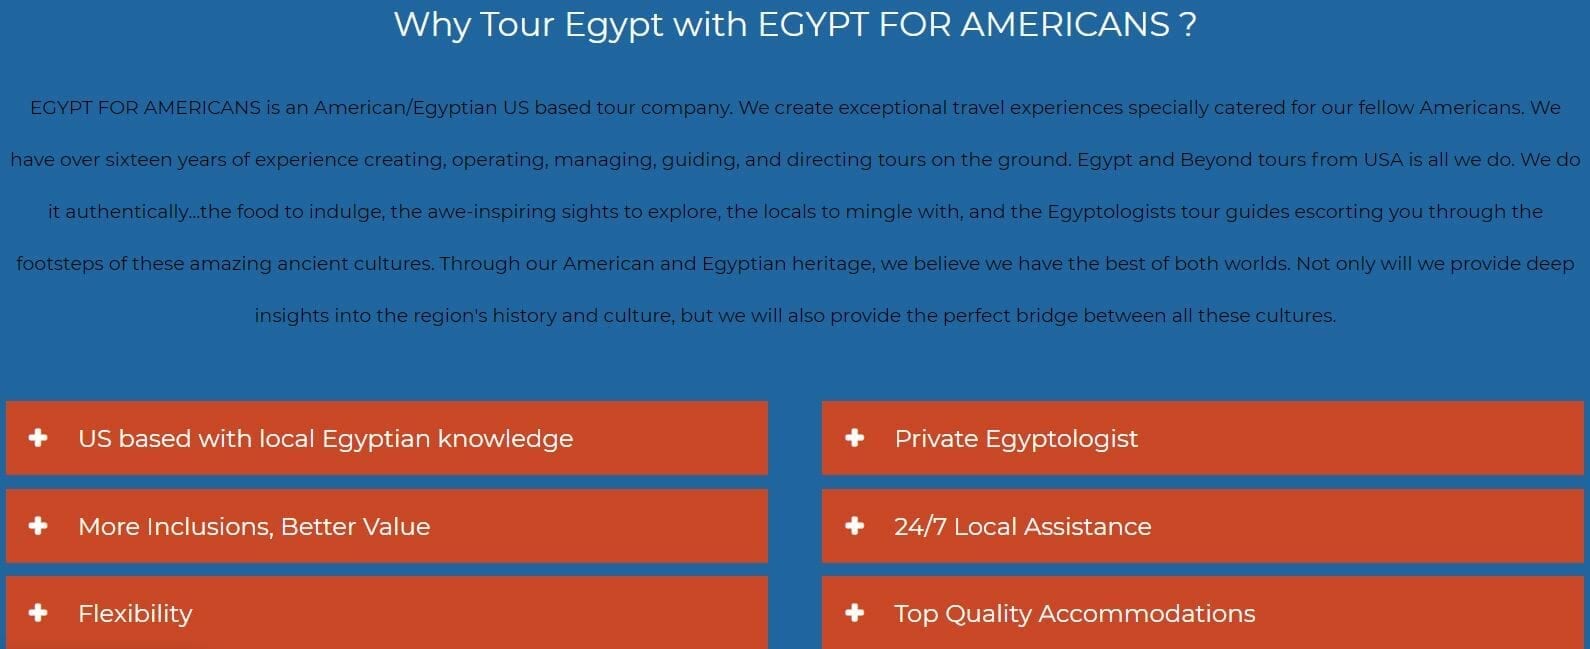 Why tour Egypt for Americans